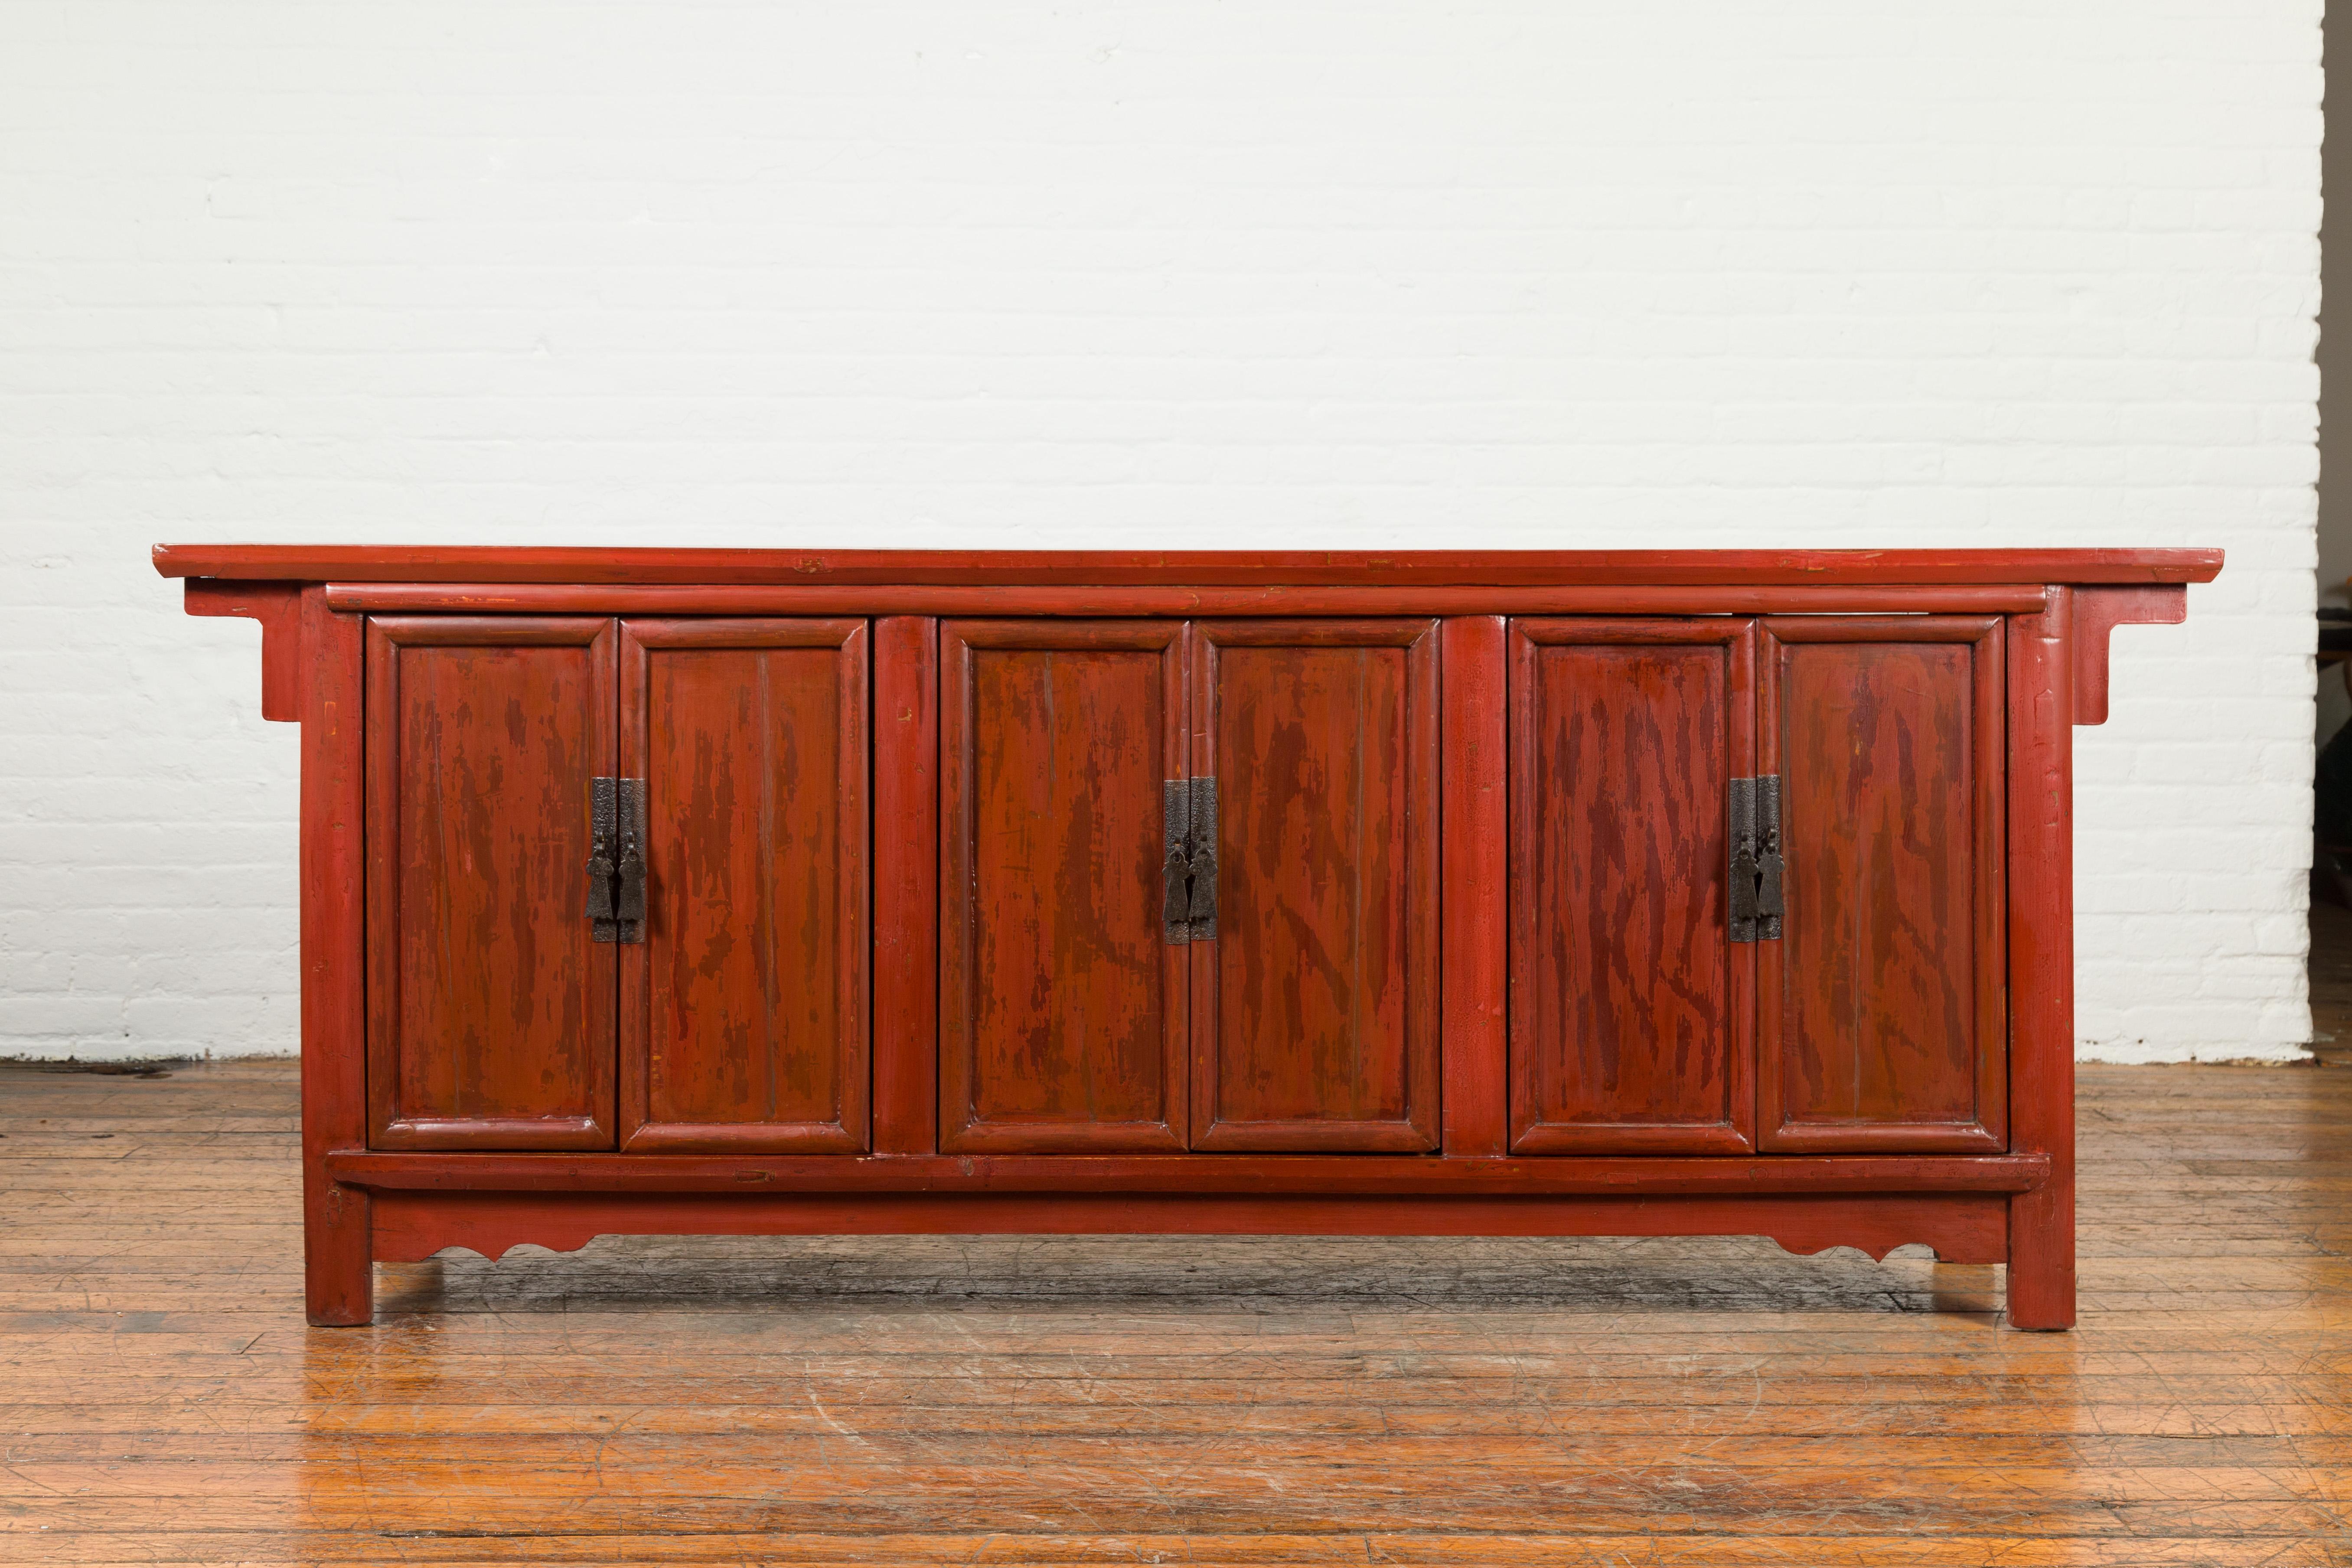 A Chinese 19th century Qing Dynasty period red lacquered elm sideboard from Shanxi, with three pairs of double doors. Created during the Qing Dynasty period, this sideboard comes from Shanxi, a north-eastern province of China, where it was made with